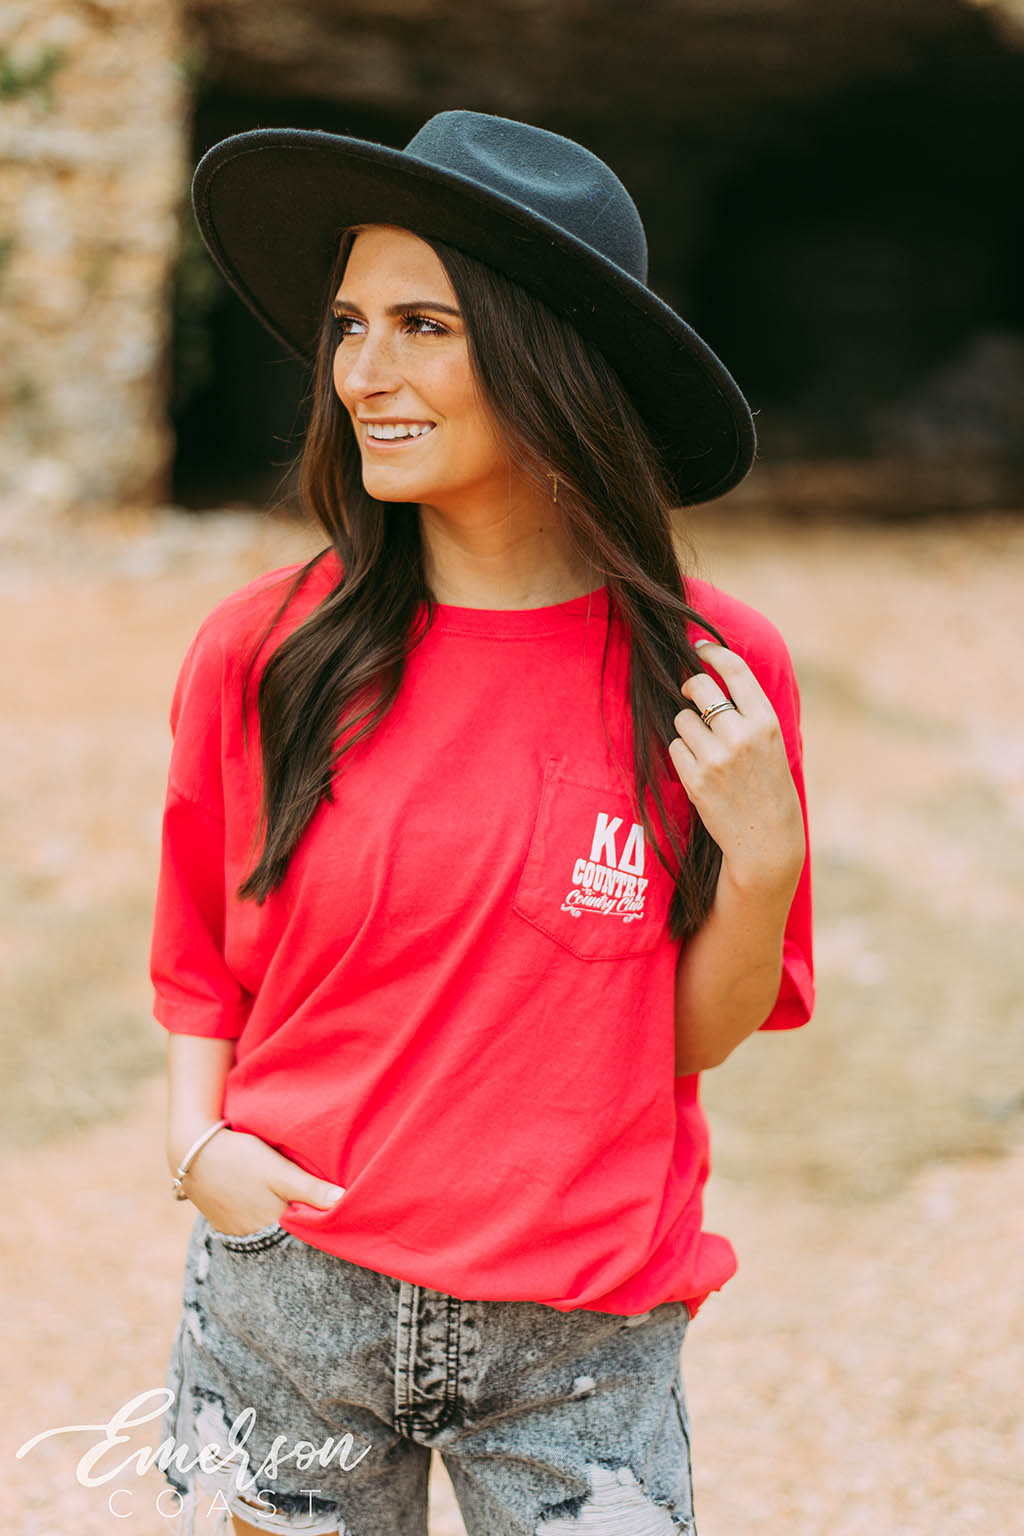 Kappa Delta Country vs. Country Club Function Tee